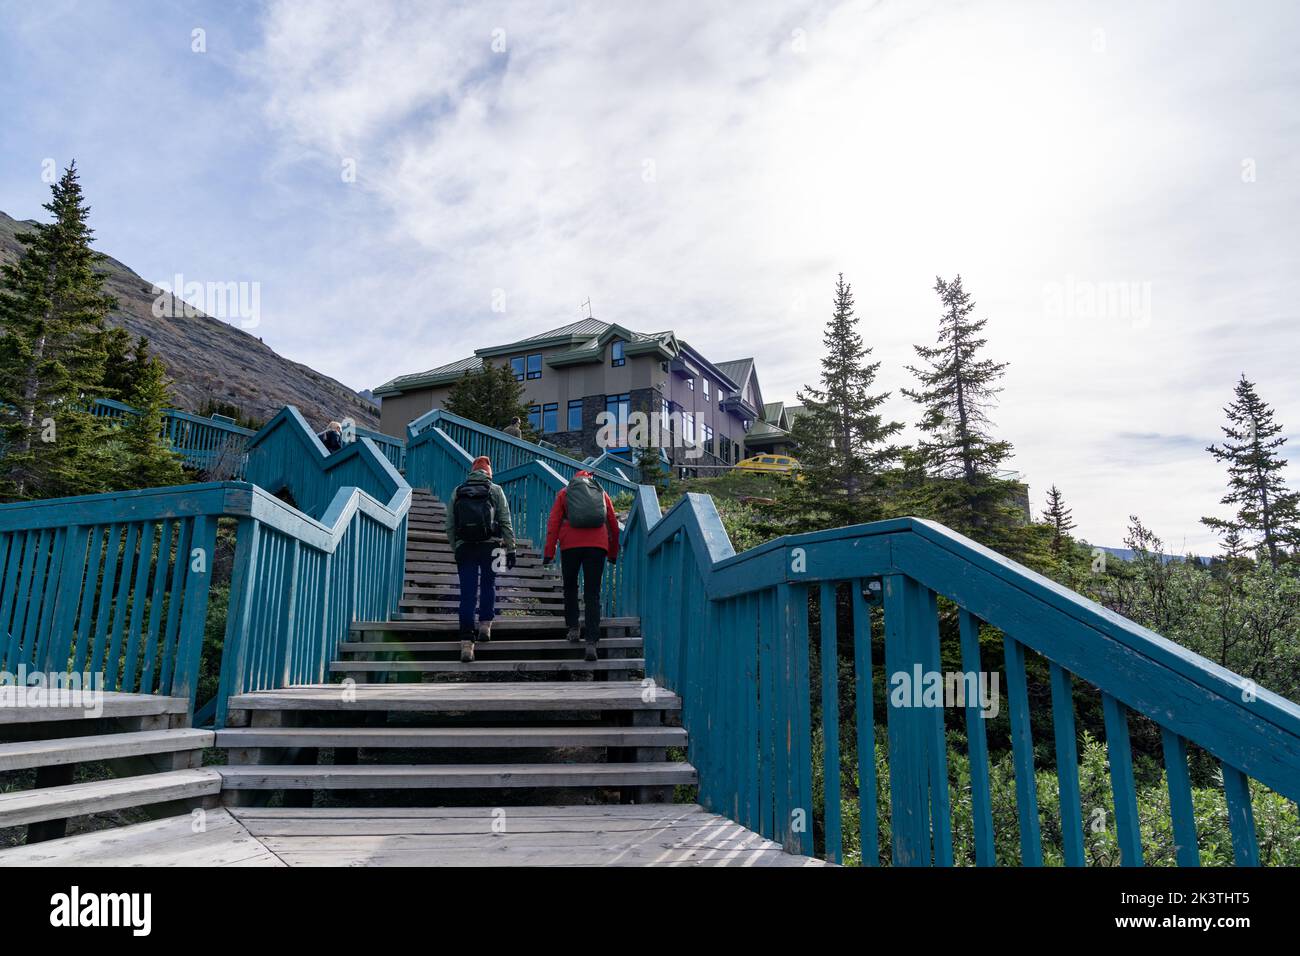 Alberta, Canada - July 14, 2022: Steps leading to the Columbia Icefield visitor center to access tours of the Athabasca Glacier Stock Photo